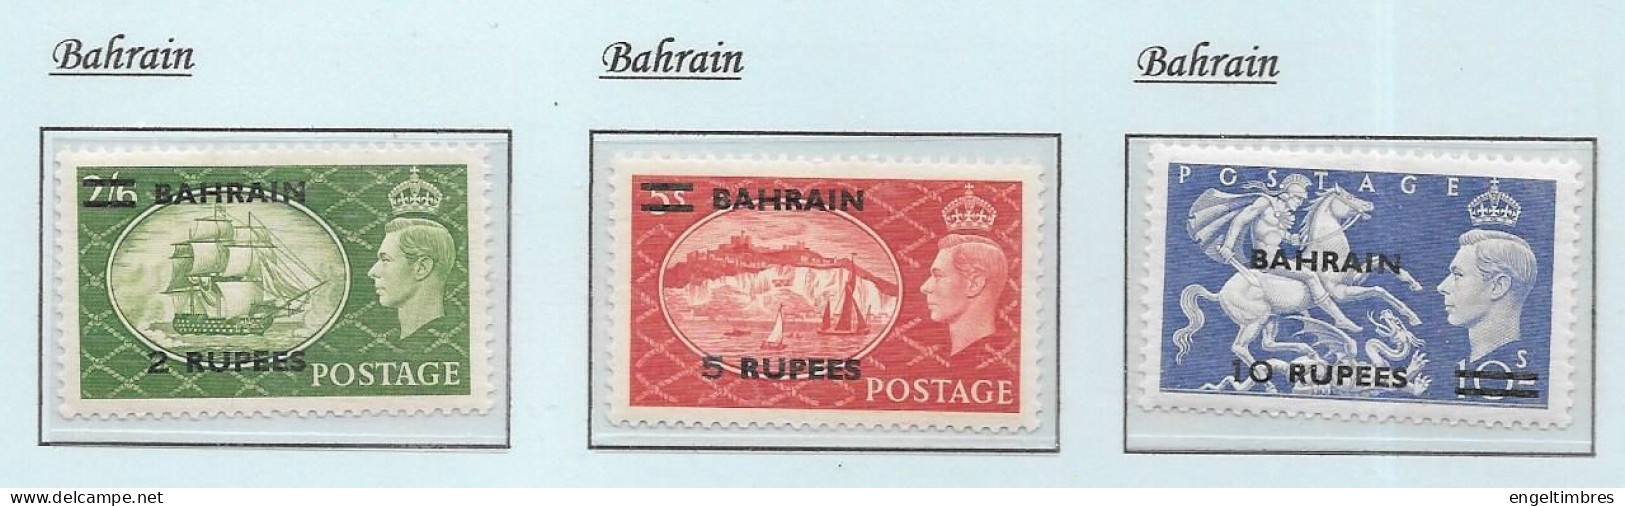 Gb 1948  Festival Of Britain OVERPRINTED BAHRAIN   (3)     MOUNTED MINT  - See Notes & Scans - Unused Stamps